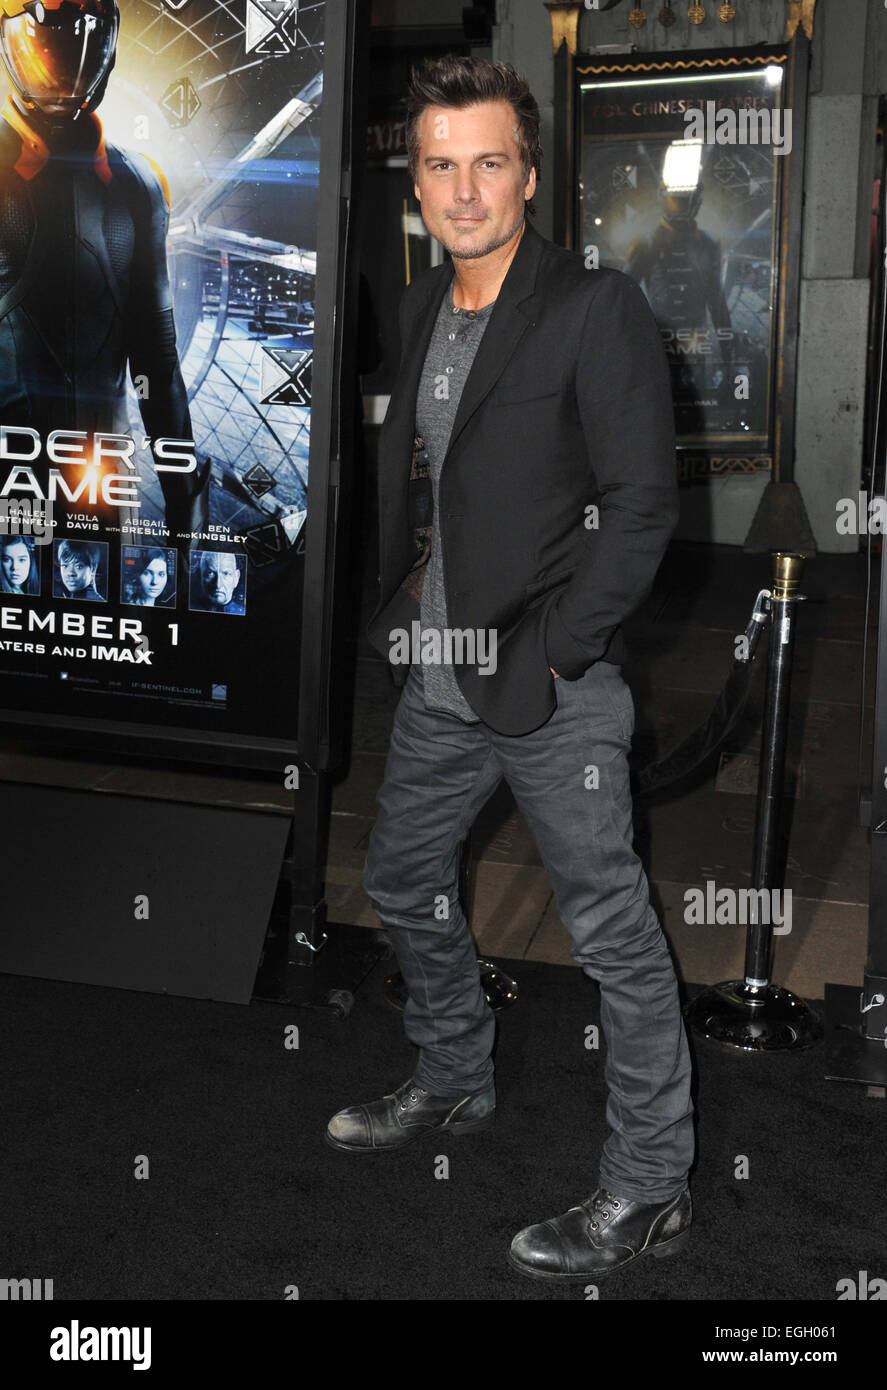 LOS ANGELES, CA - OCTOBER 28, 2013: Len Wiseman at the Los Angeles premiere of 'Ender's Game' at the TCL Chinese Theatre. Stock Photo